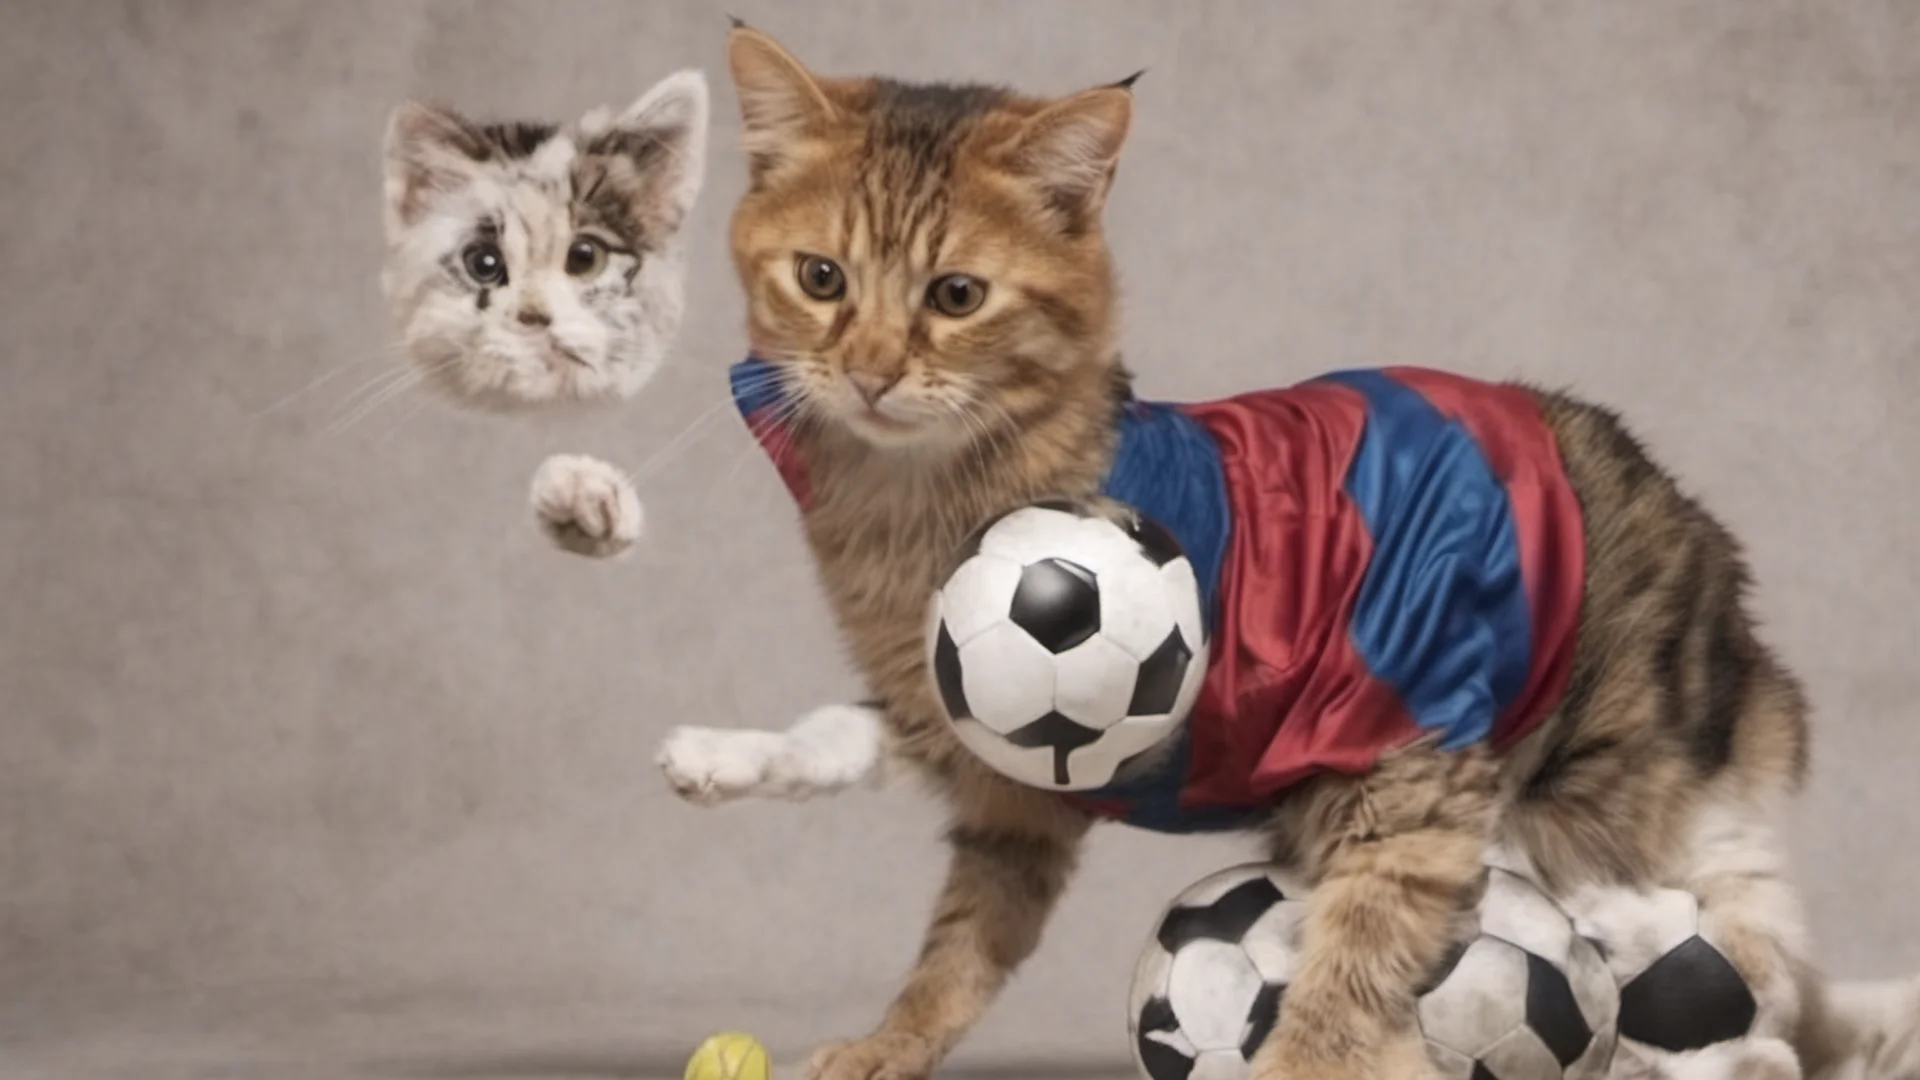 aicute cat playing football with messi amazing awesome portrait 2 wide